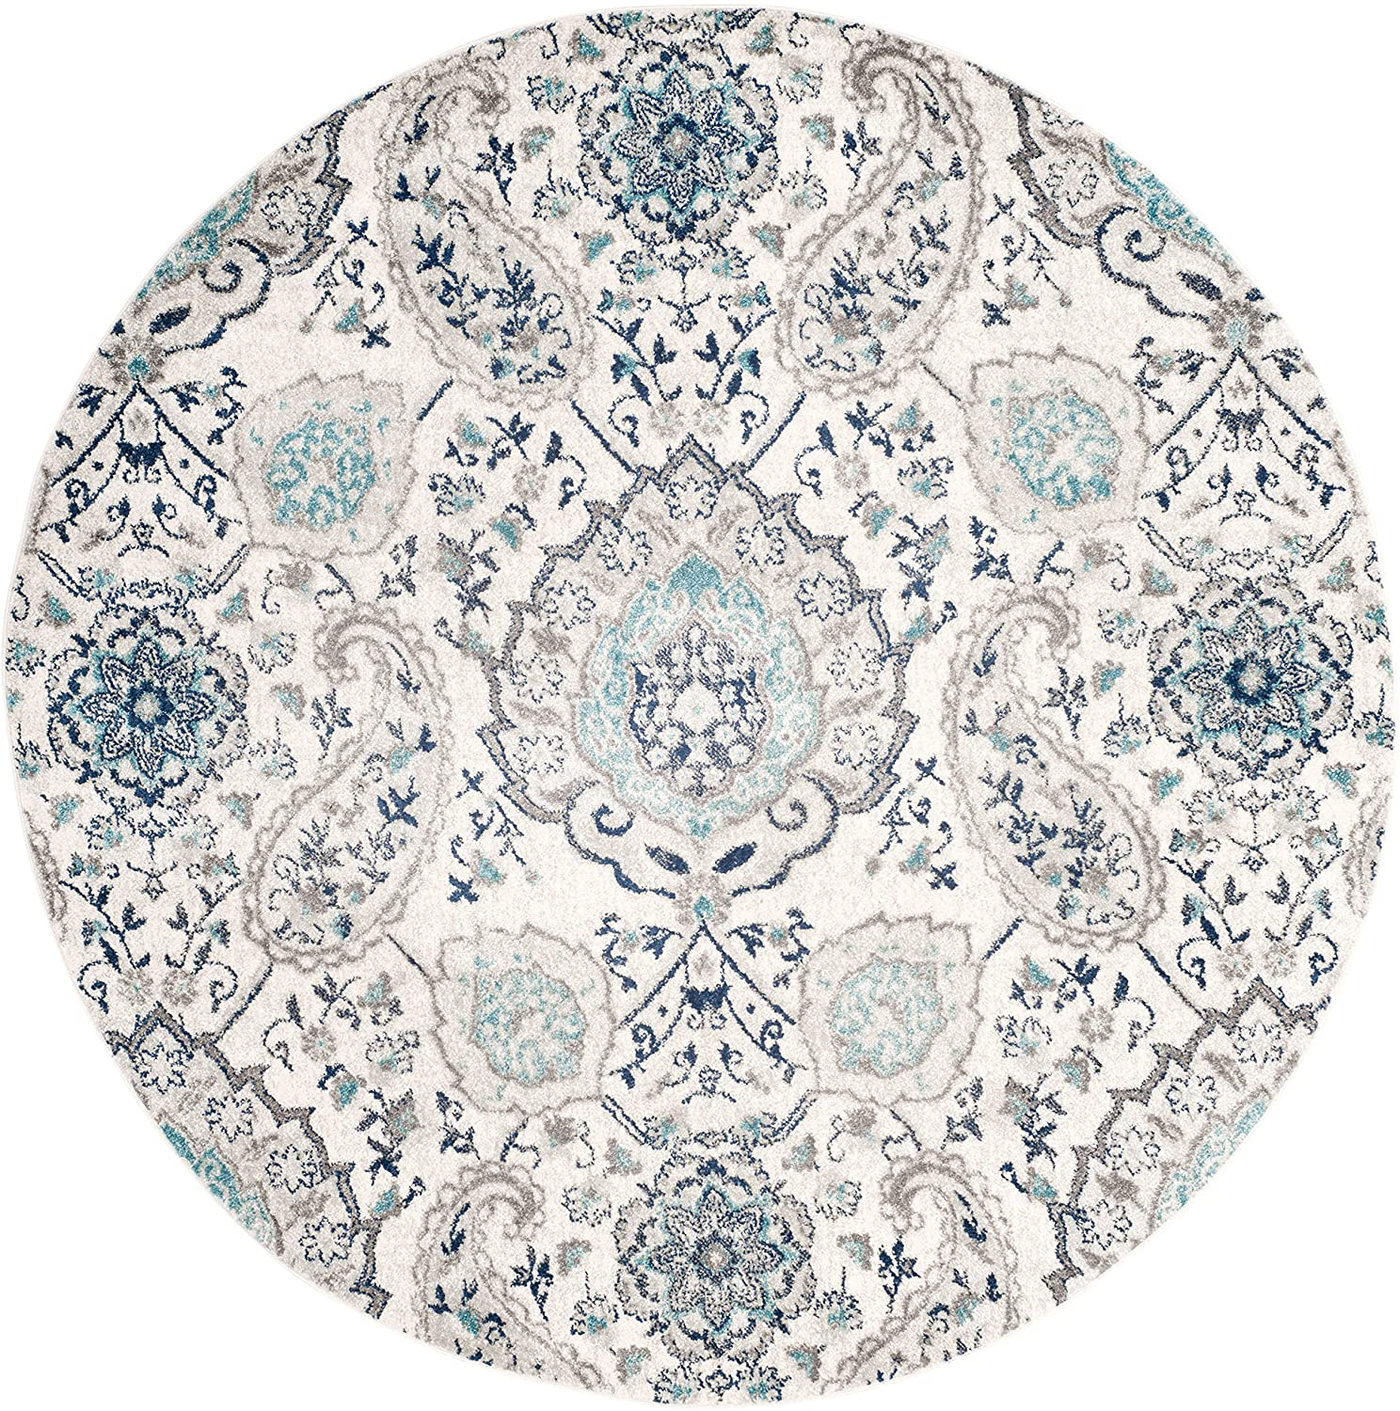 Safavieh Madison Collection MAD600C Boho Chic Glam Paisley Non-Shedding Dining Room Entryway Foyer Living Room Bedroom Area Rug, 5'3" x 5'3" Round, Cream / Light Grey